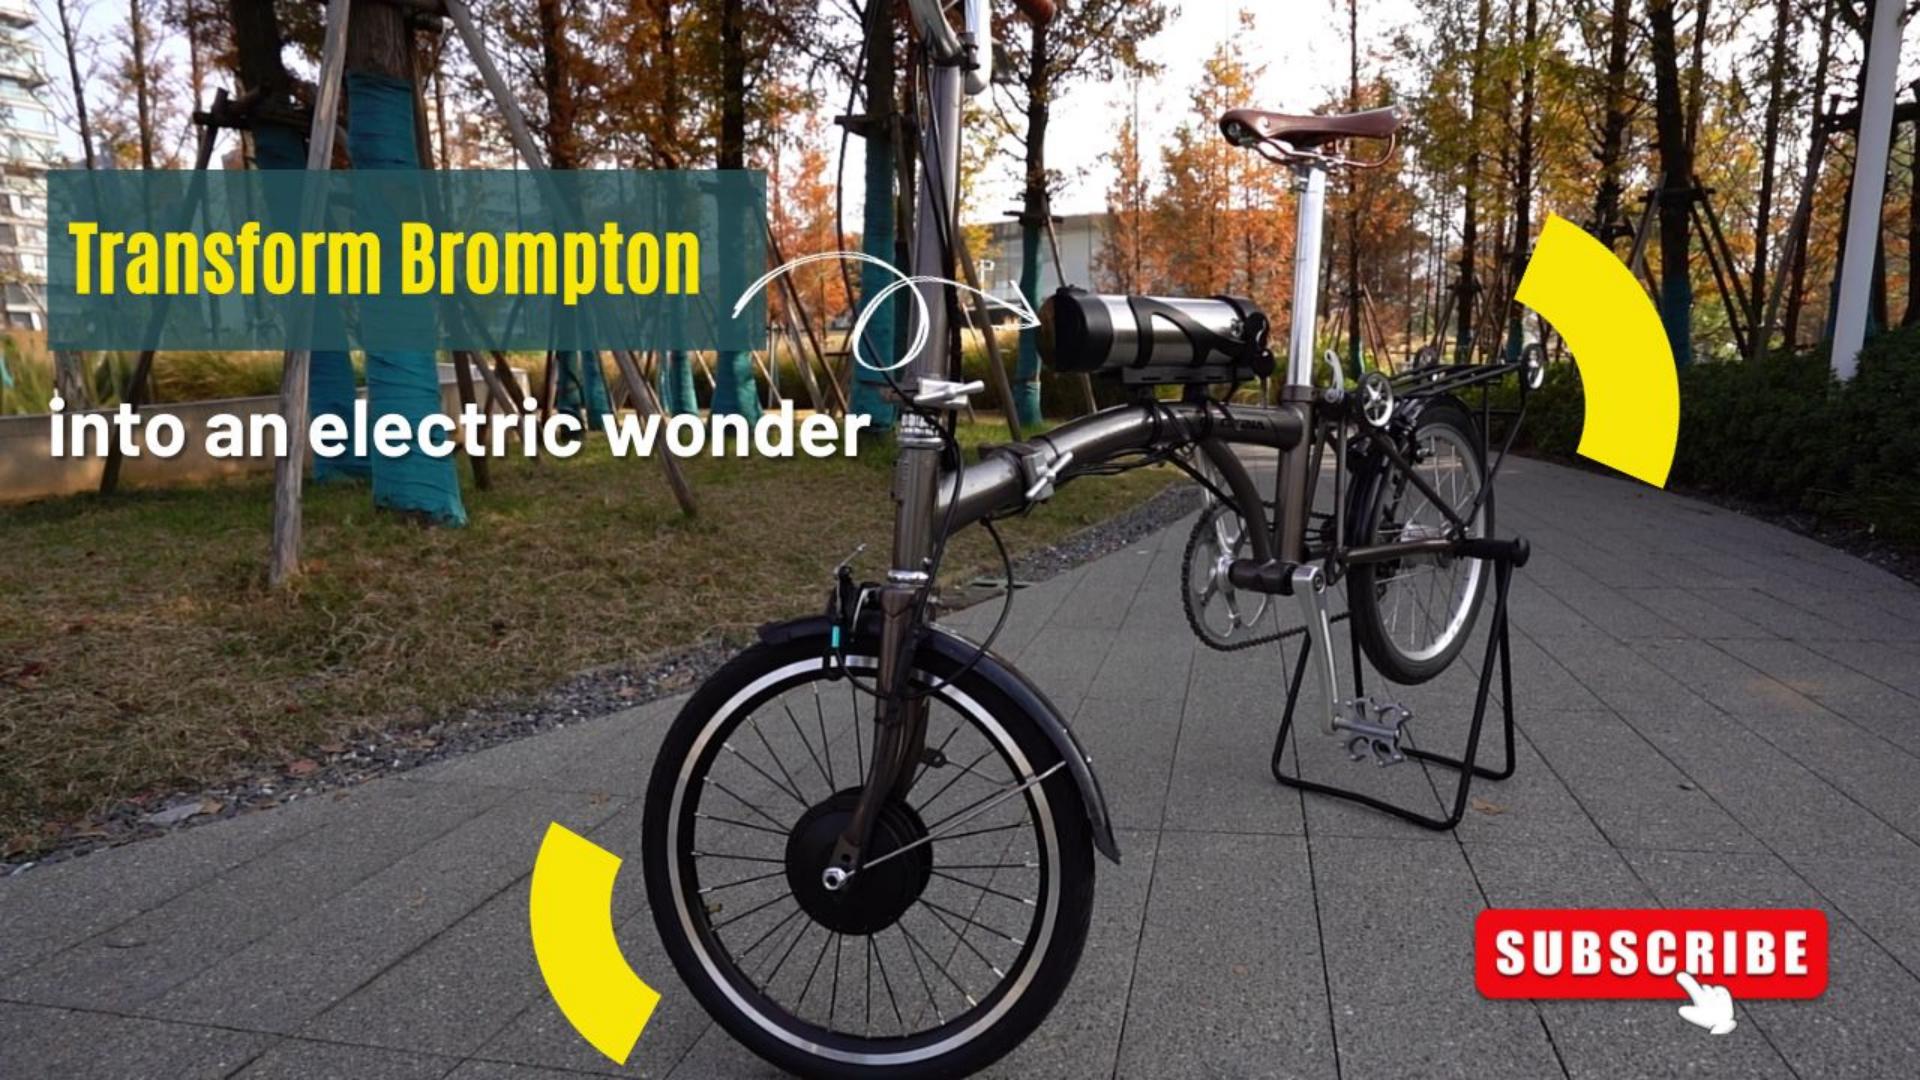 Ready to transform your Brompton into an electric wonder?